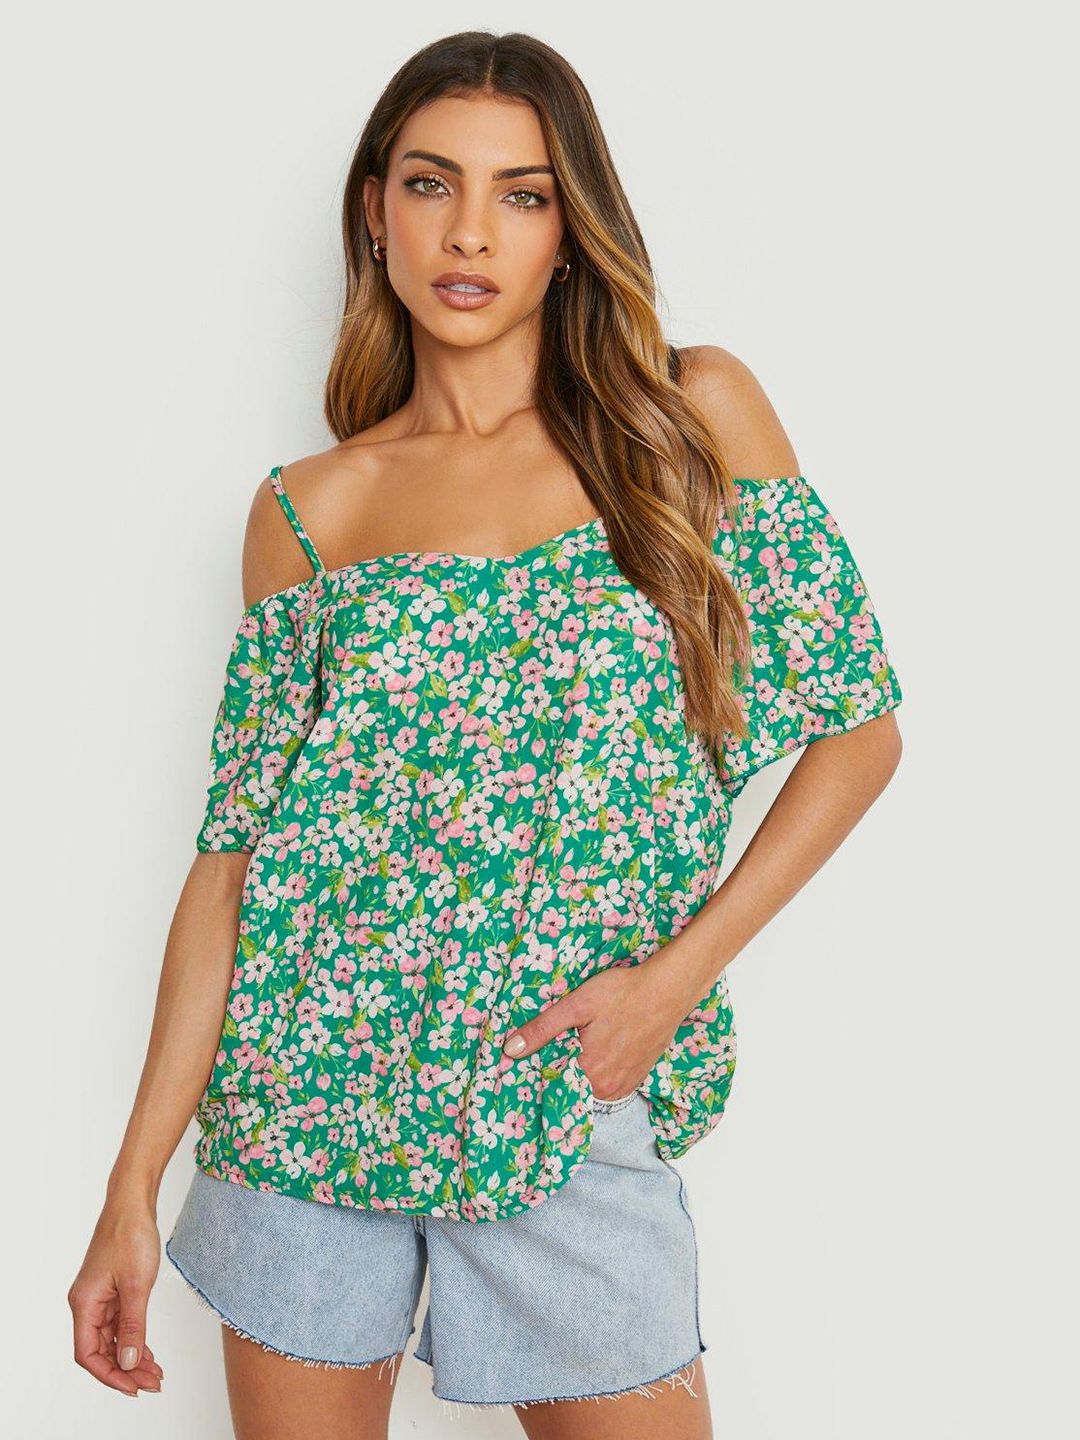 Boohoo Floral Print Top Price in India